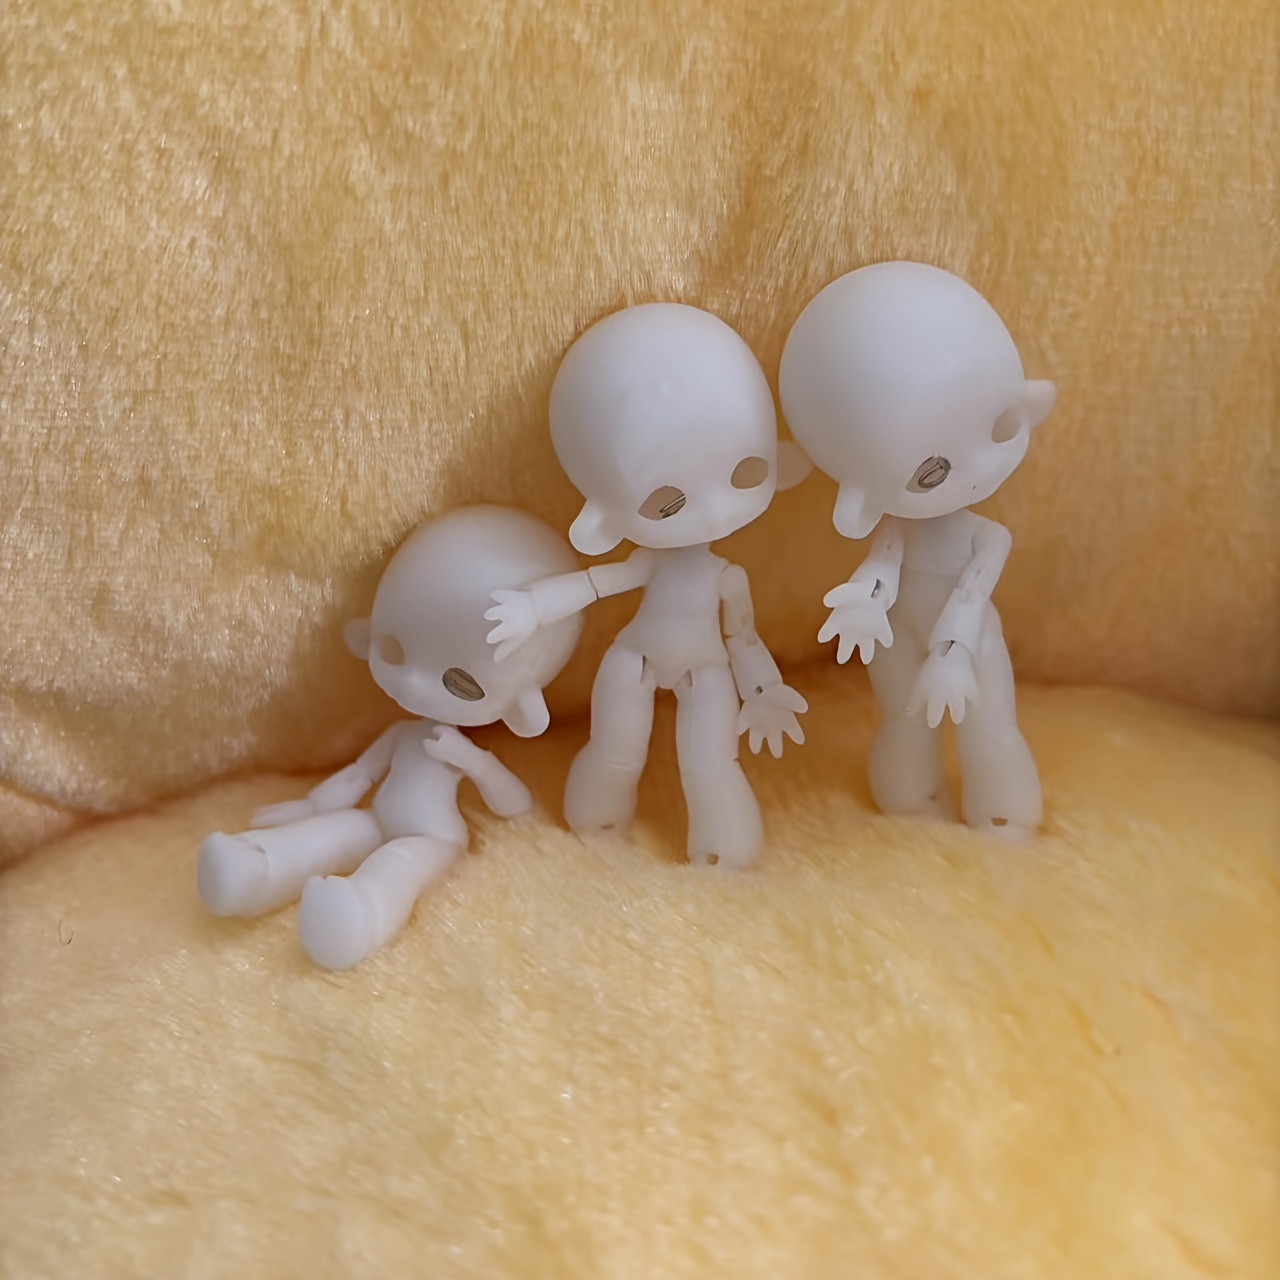 BJD Doll Simulation Doll For People ,Cute Kawaii BJD Doll For Boys Girls  Gift, The Top Can Be Opened, 18 Joints